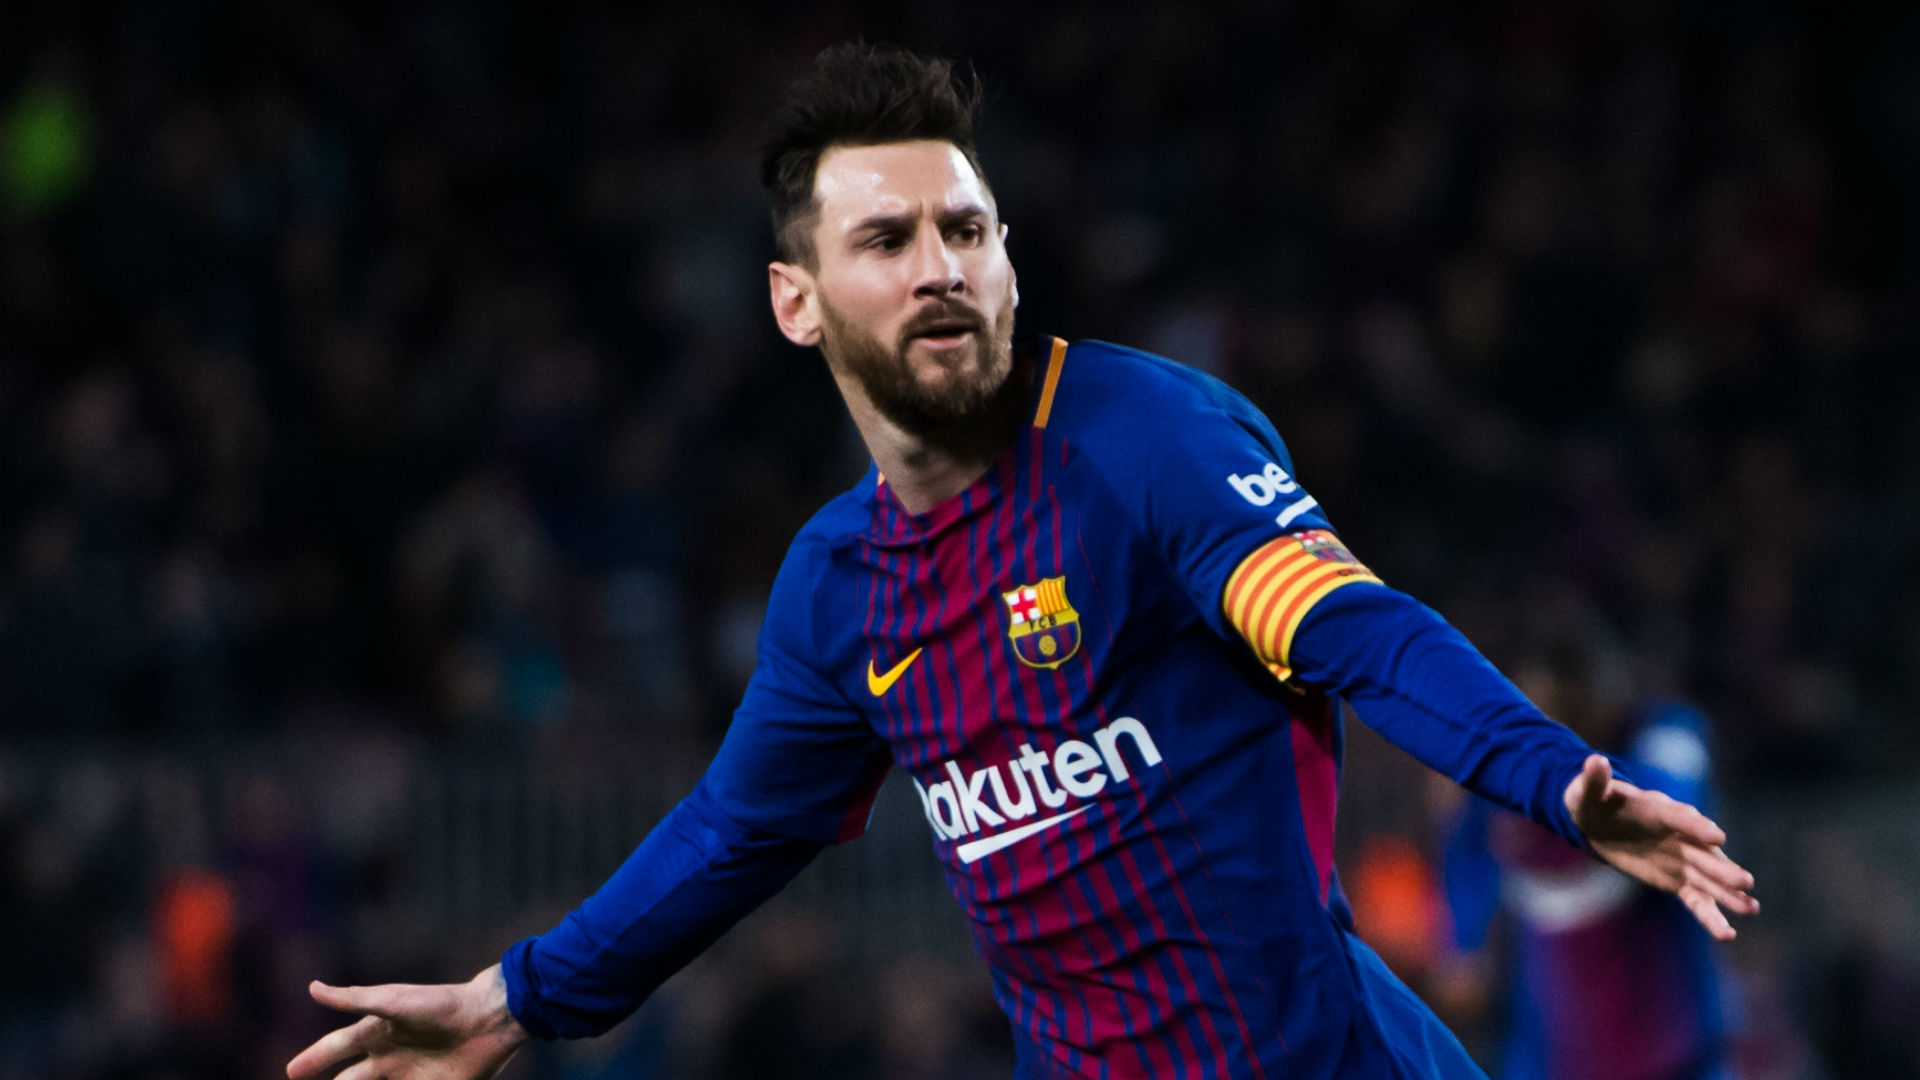 Barcelona vs Real Madrid: TV channel, live stream, squad news & preview | Goal.com1920 x 1080